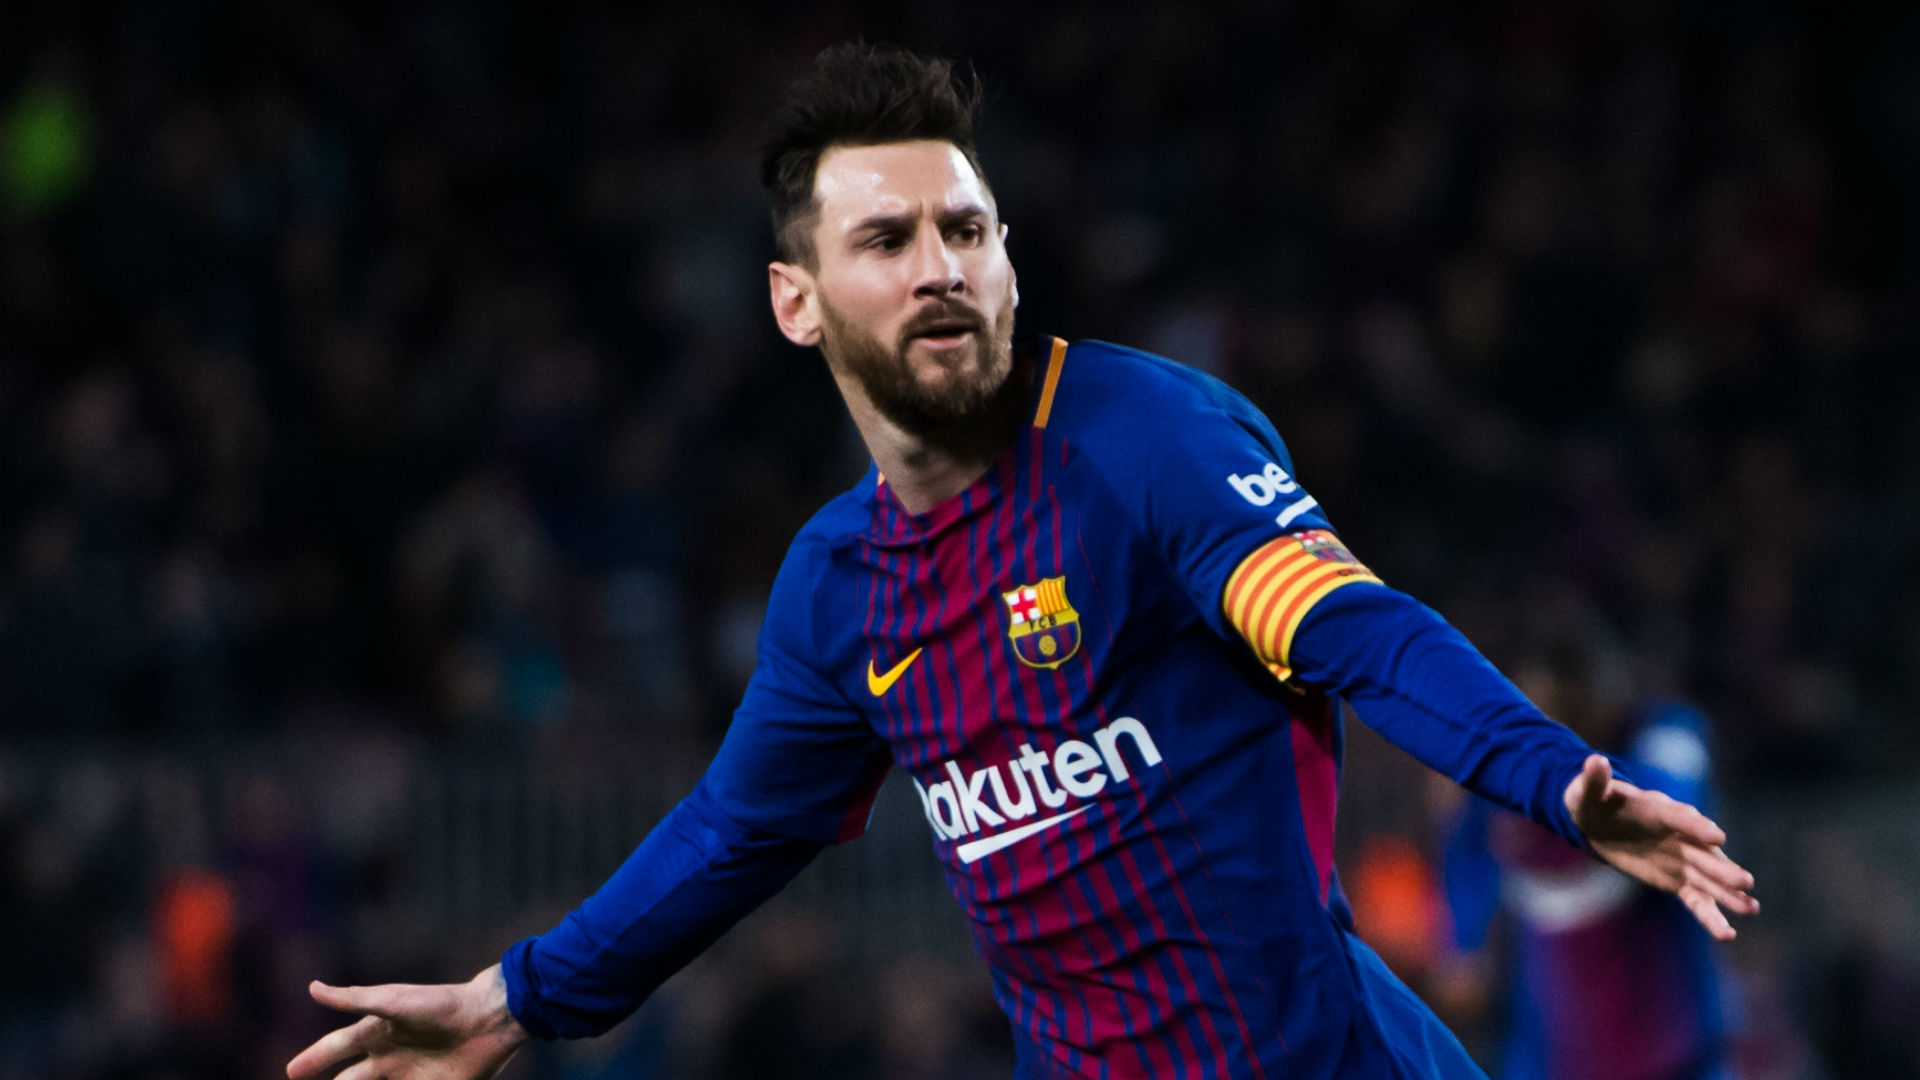 Barcelona vs Real Madrid: TV channel, live stream, squad news & preview | Goal.com1920 x 1080